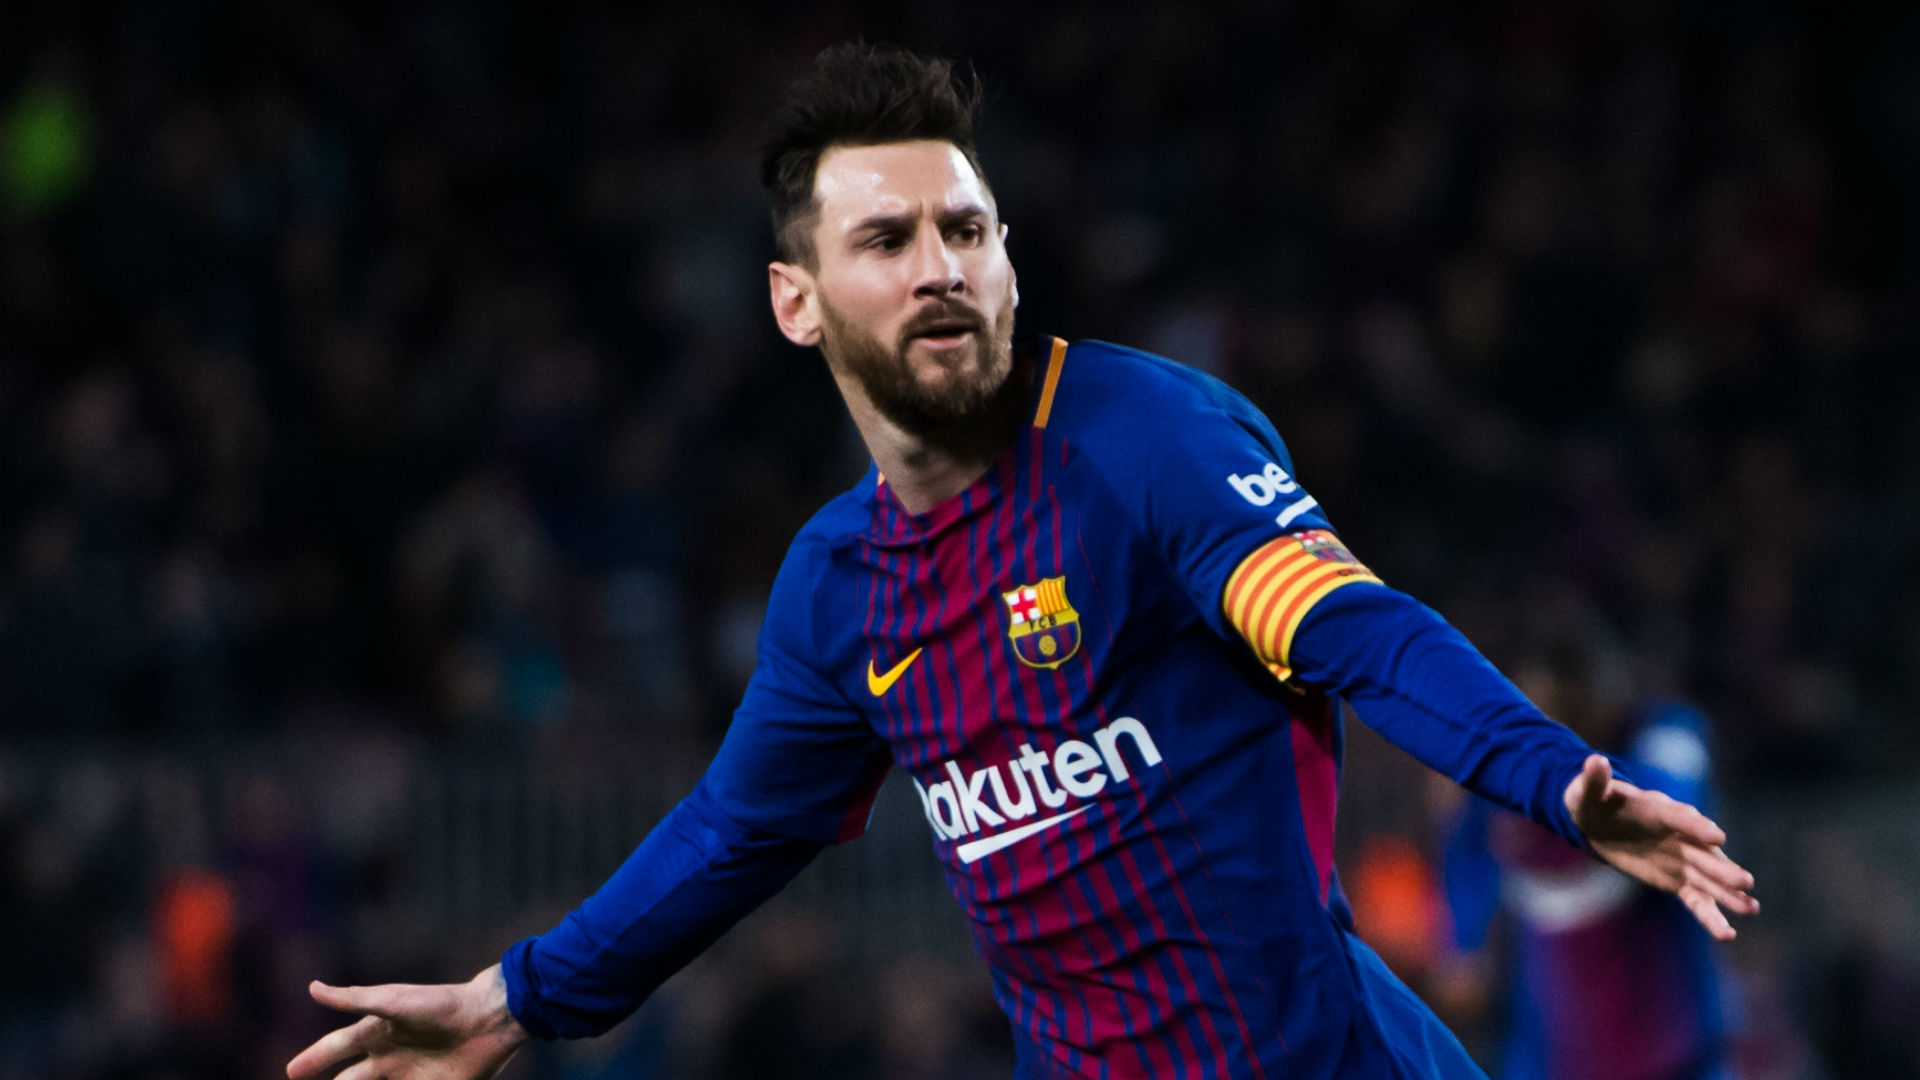 Barcelona vs Real Madrid: TV channel, live stream, squad news & preview | Goal.com1920 x 1080